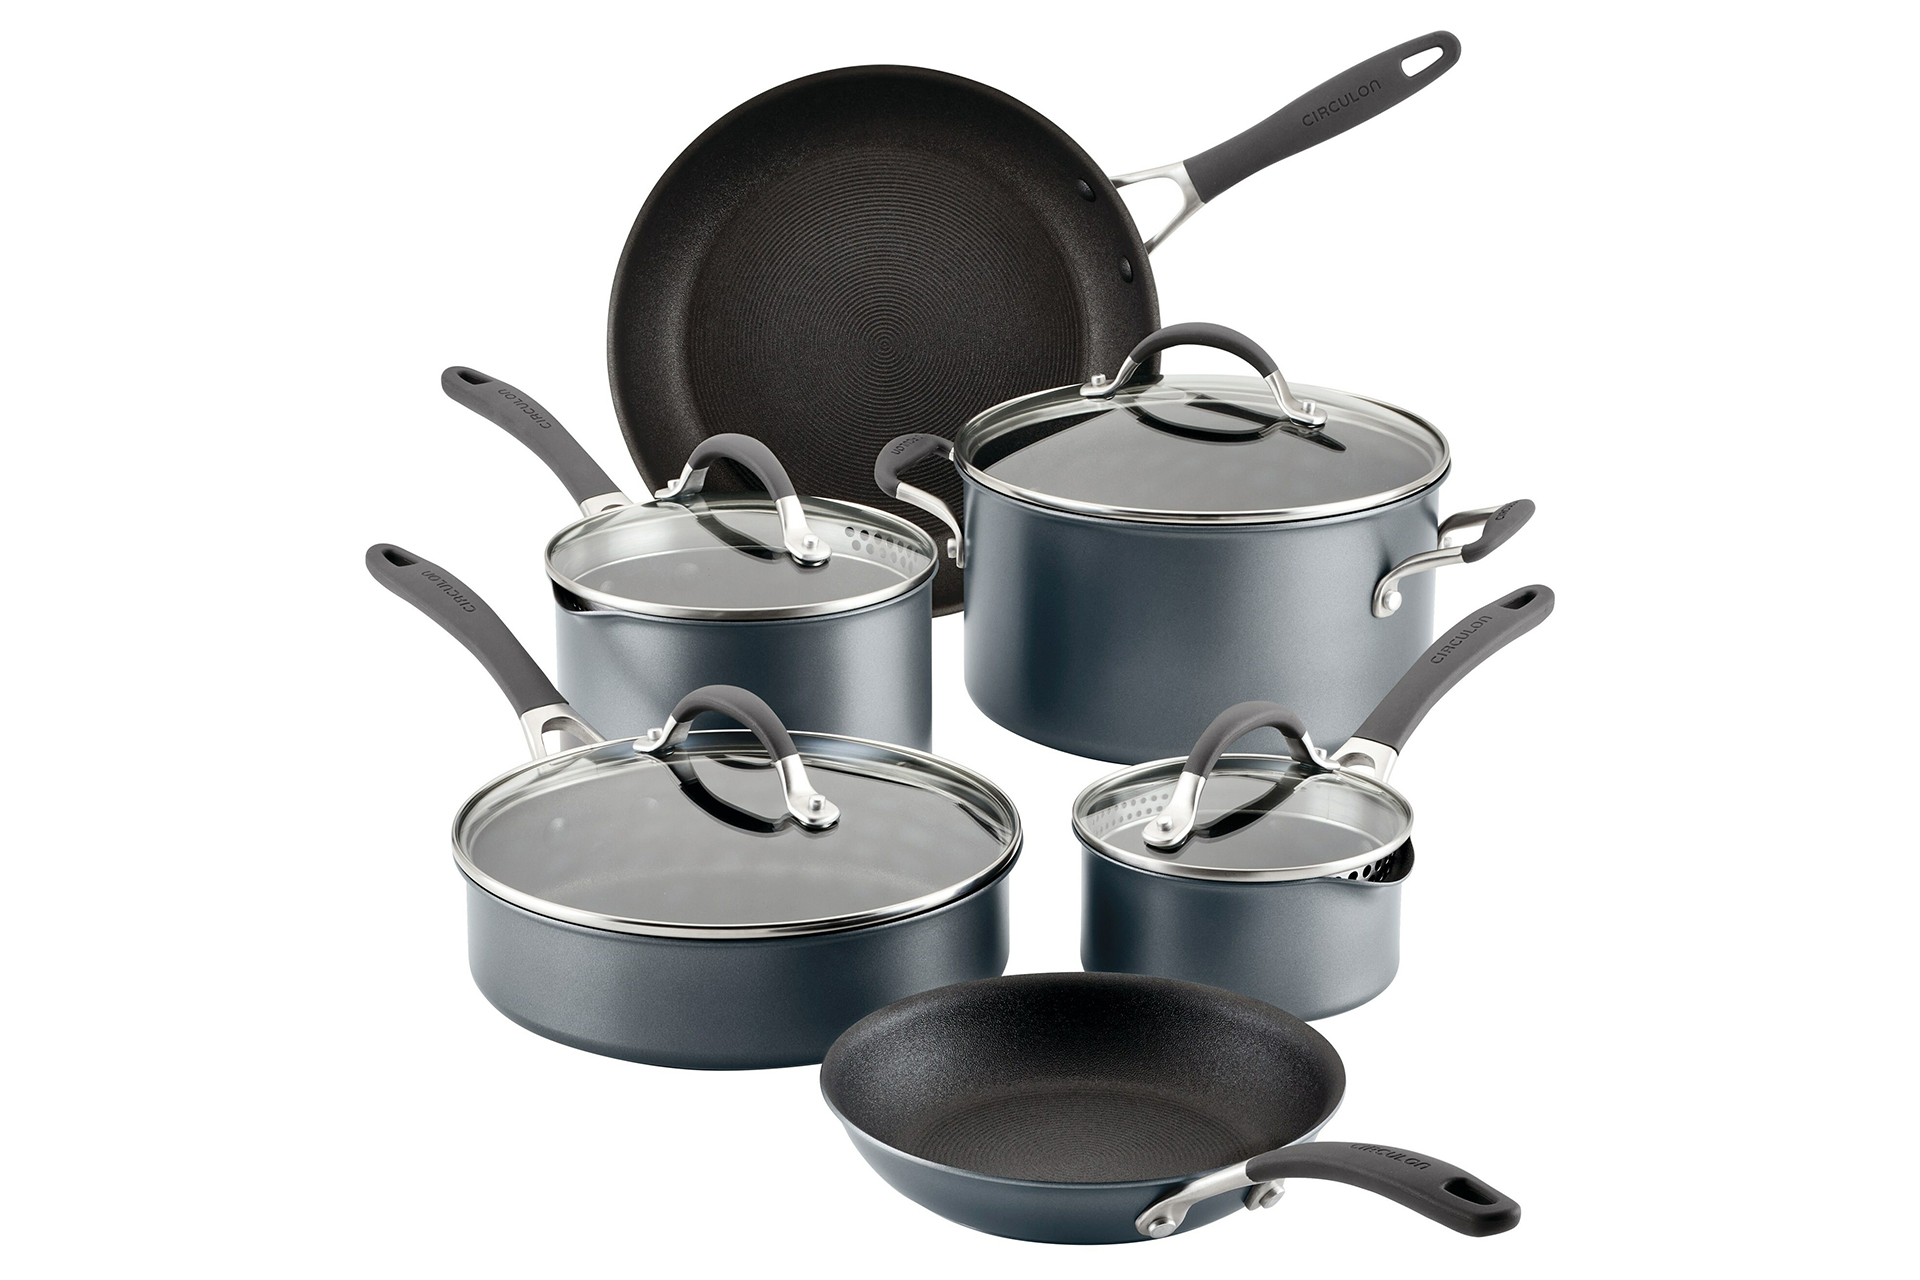 Circulon Introduces A1 Series Cookware with 'ScratchDefense